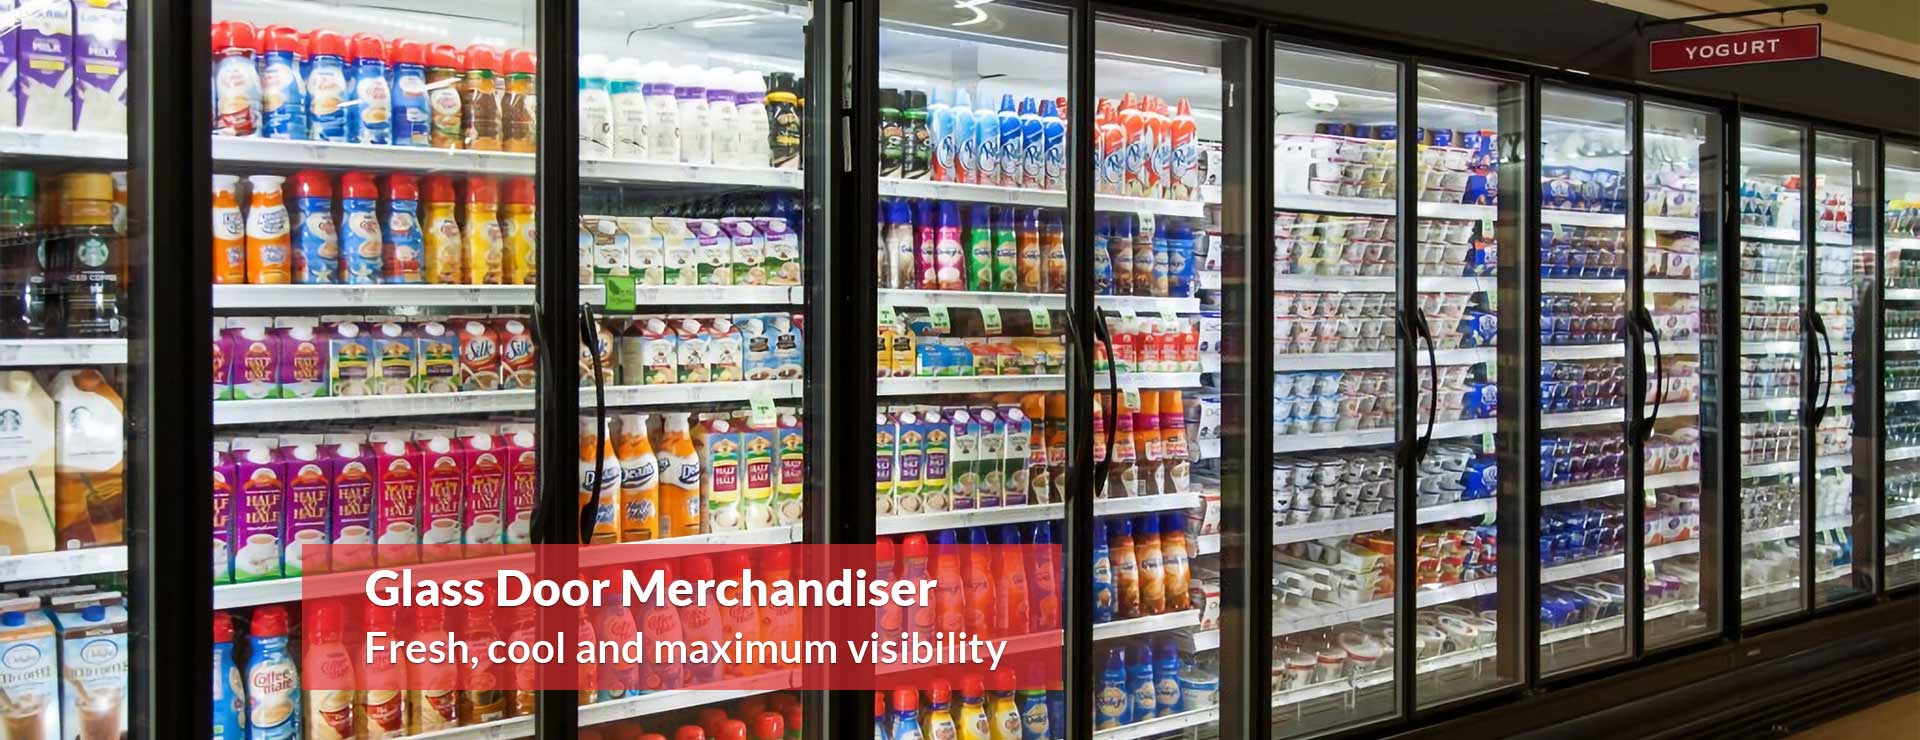 4 Different Types Of Commercial Display Refrigeration